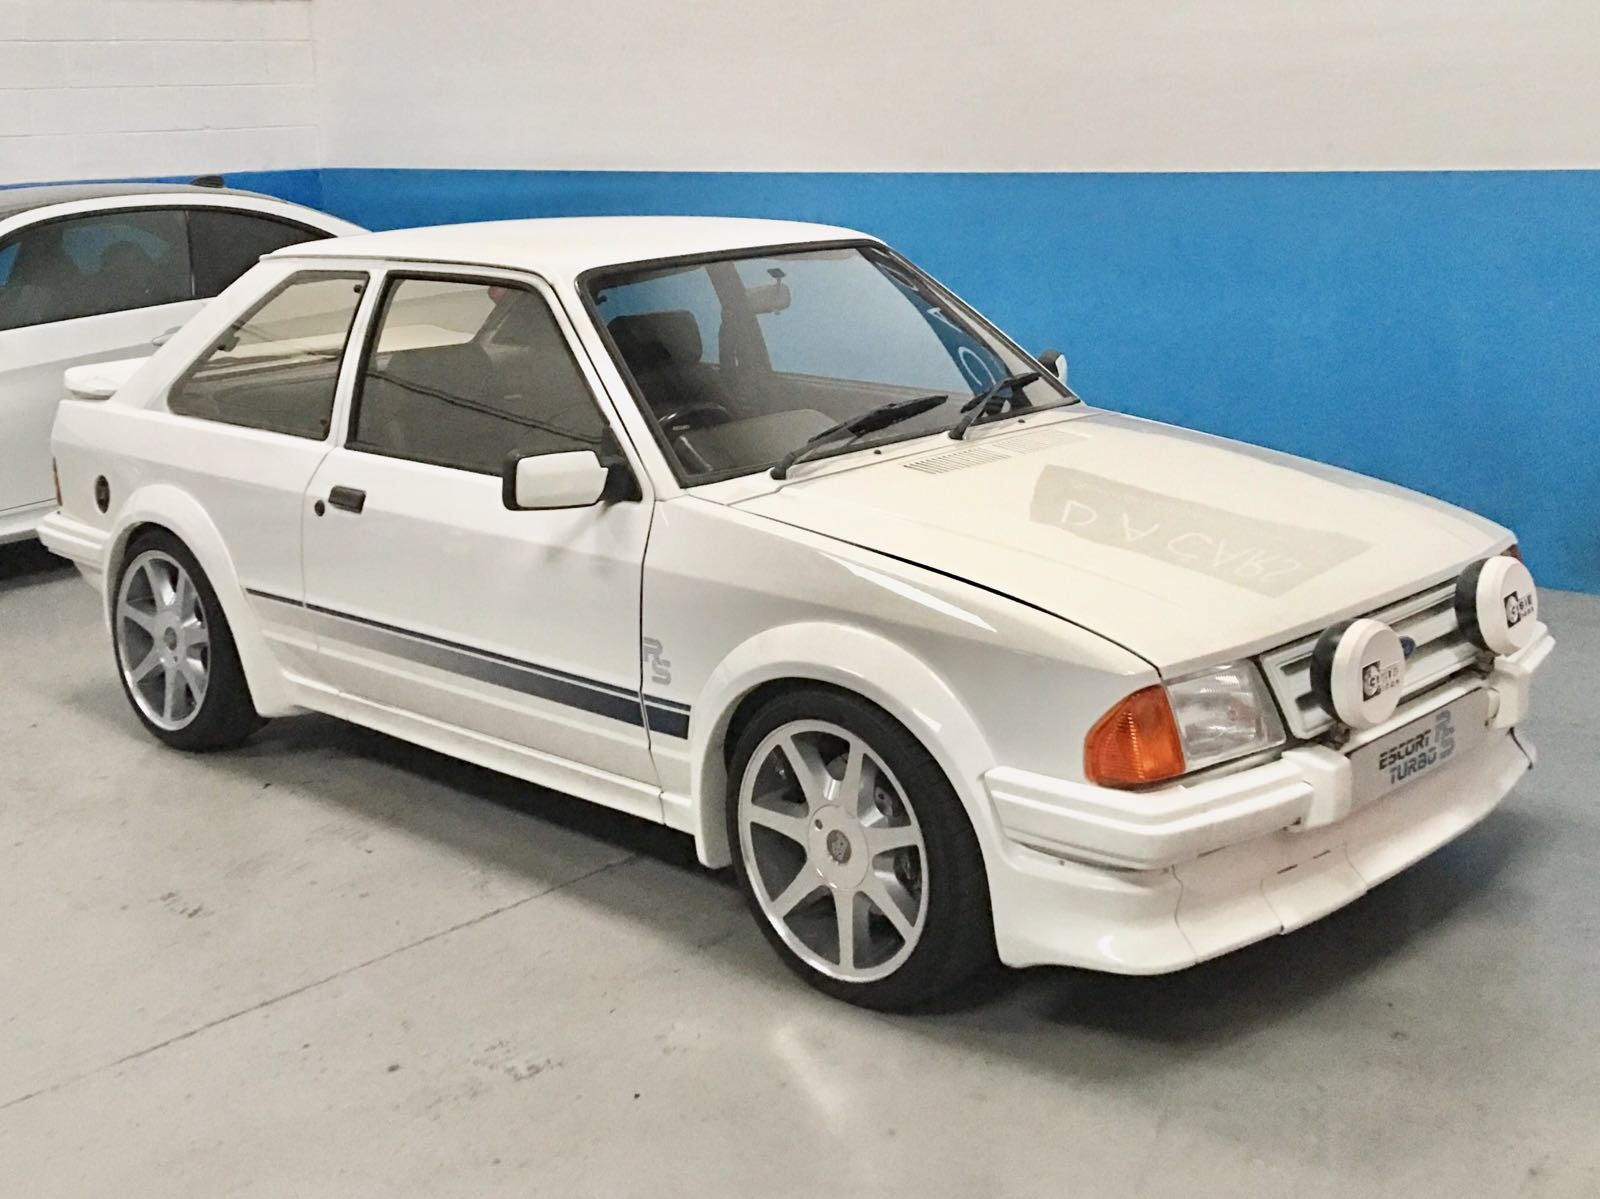 ** Regretfully Withdrawn ** 1986 Ford Escort RS Turbo Series 1